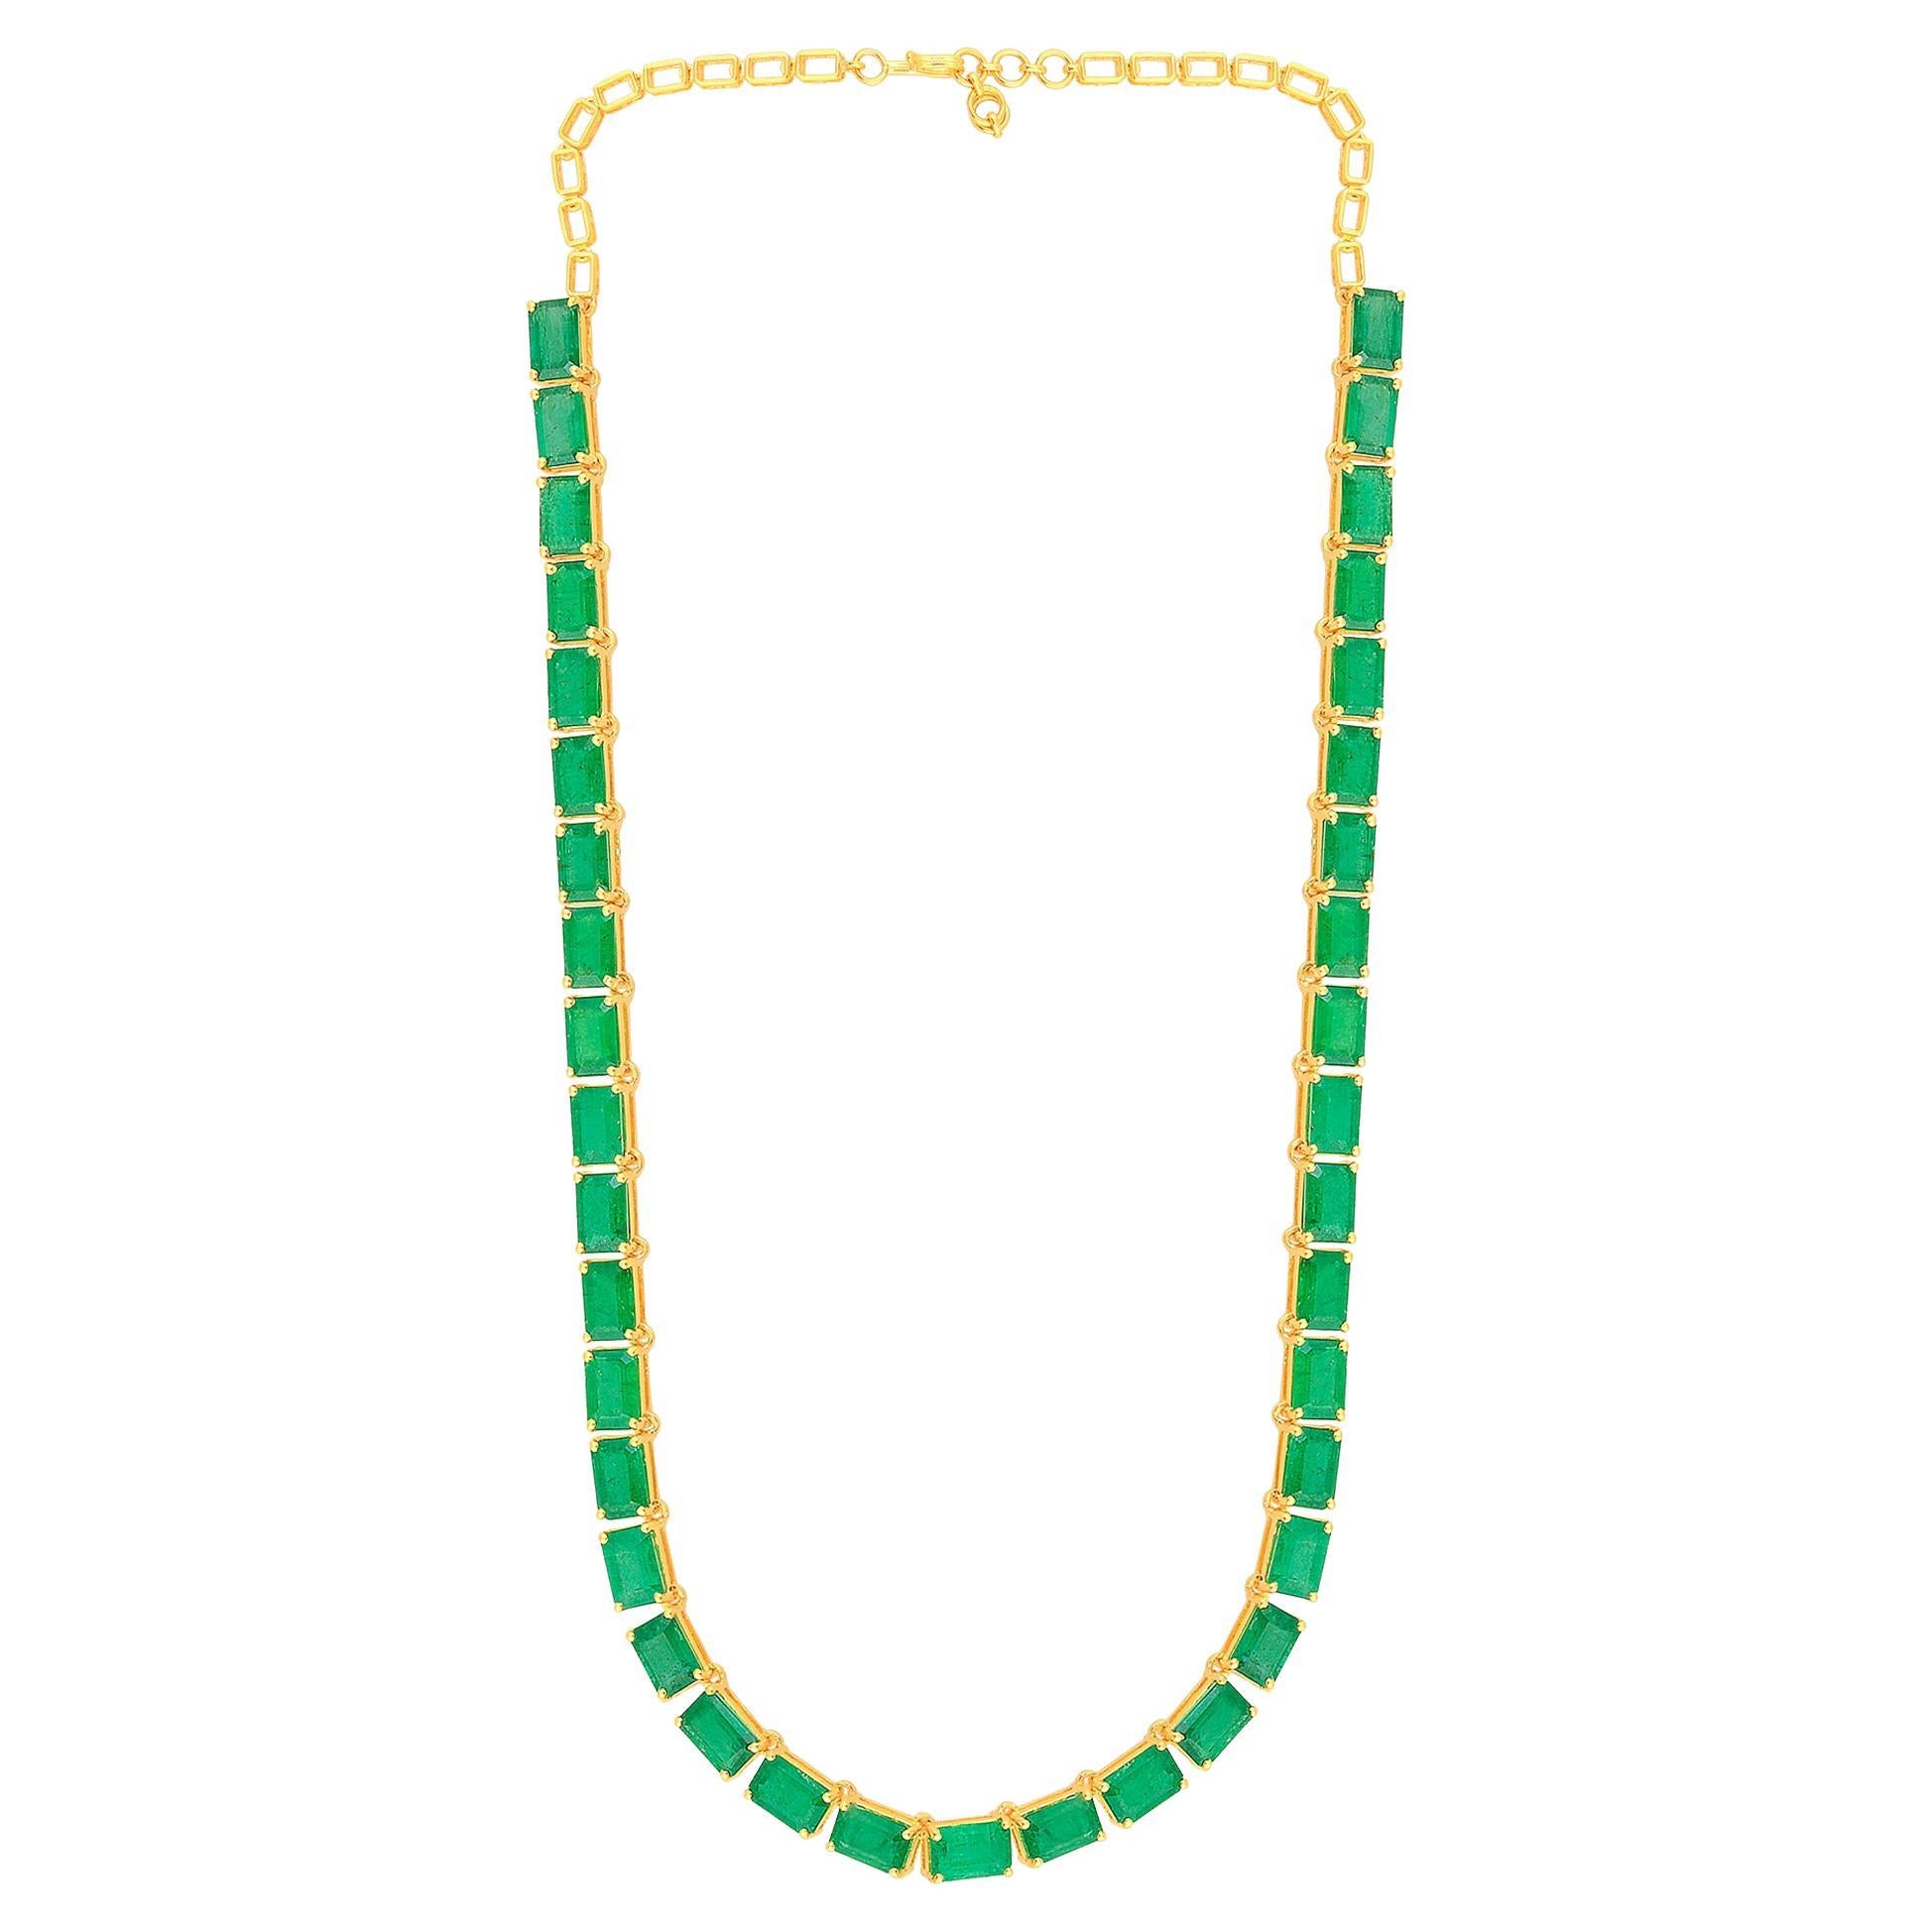 22.90 Carat Natural Emerald Gemstone Choker Necklace 18k Yellow Gold Jewelry For Sale